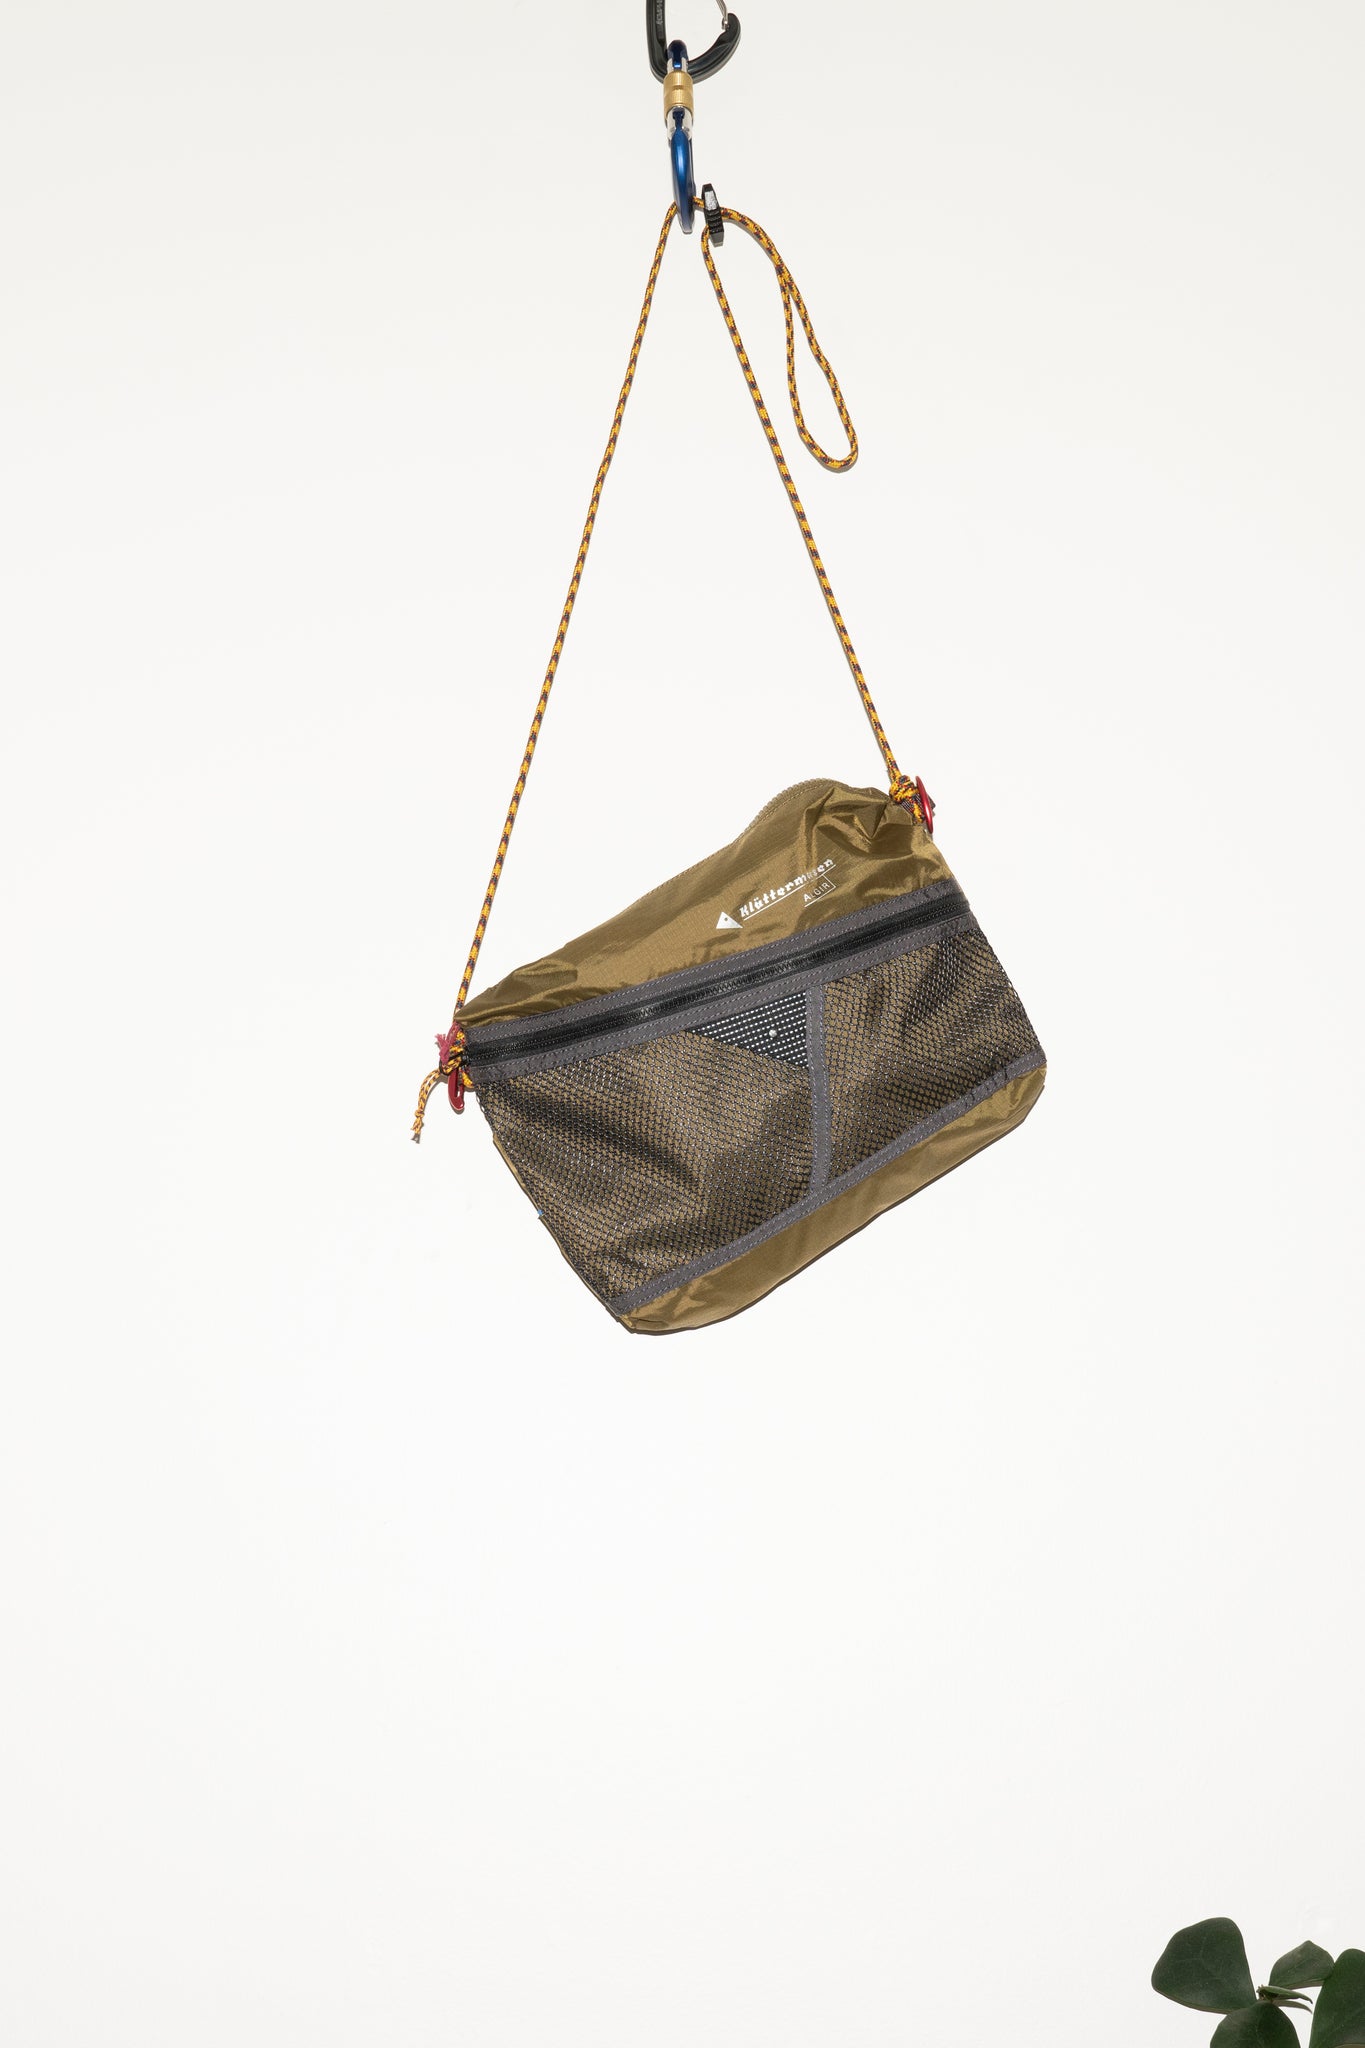 ALGIR ACCESSORY BAG LARGE IN OLIVE